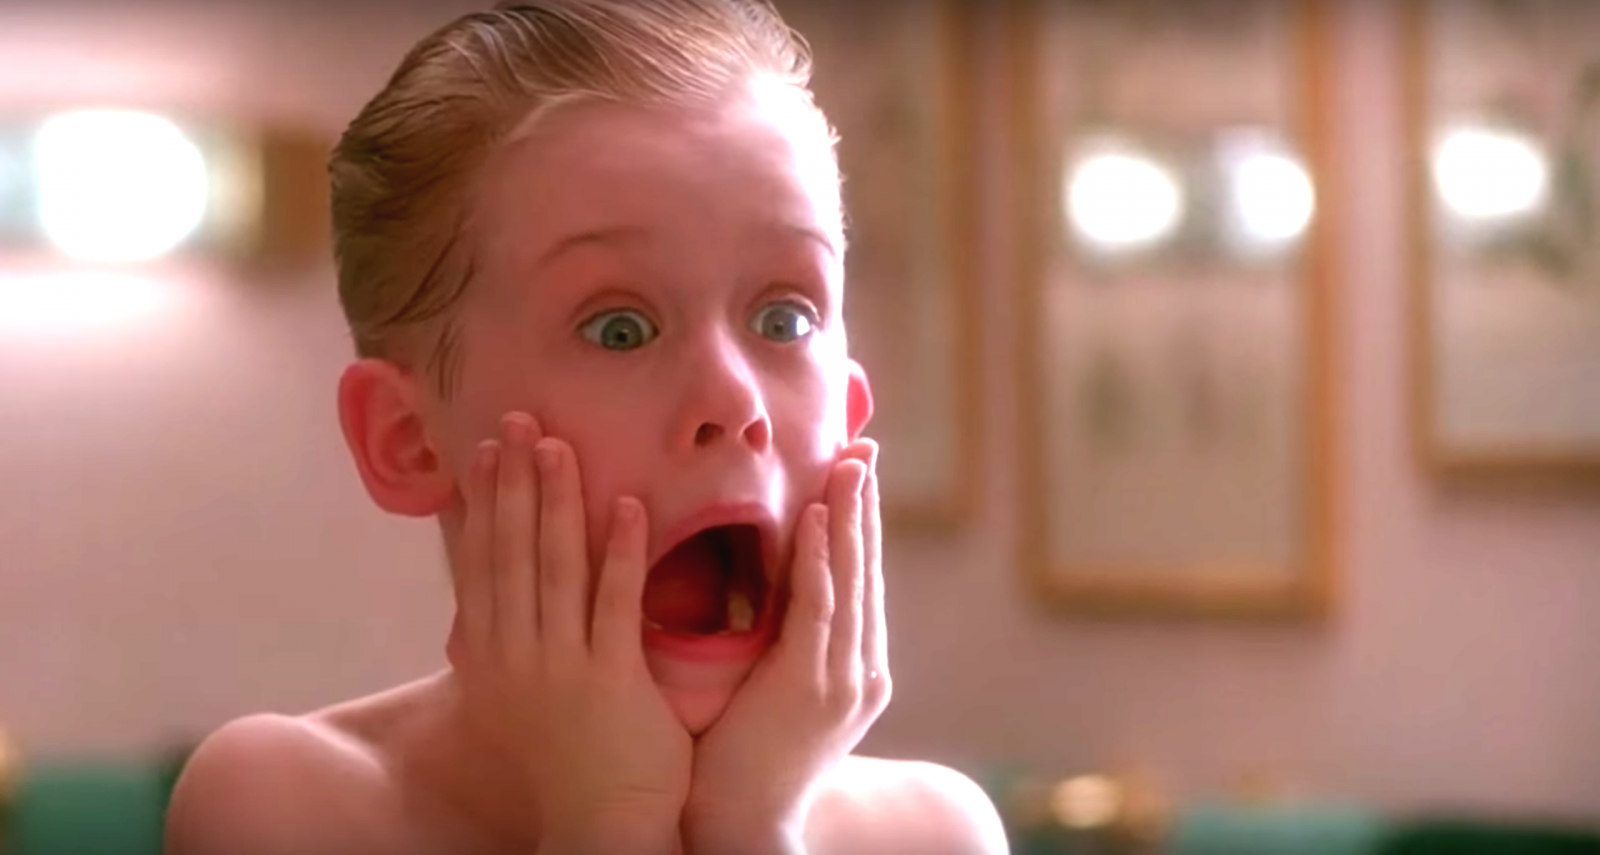 Iconic scene from Home Alone, now a Disney Christmas movie